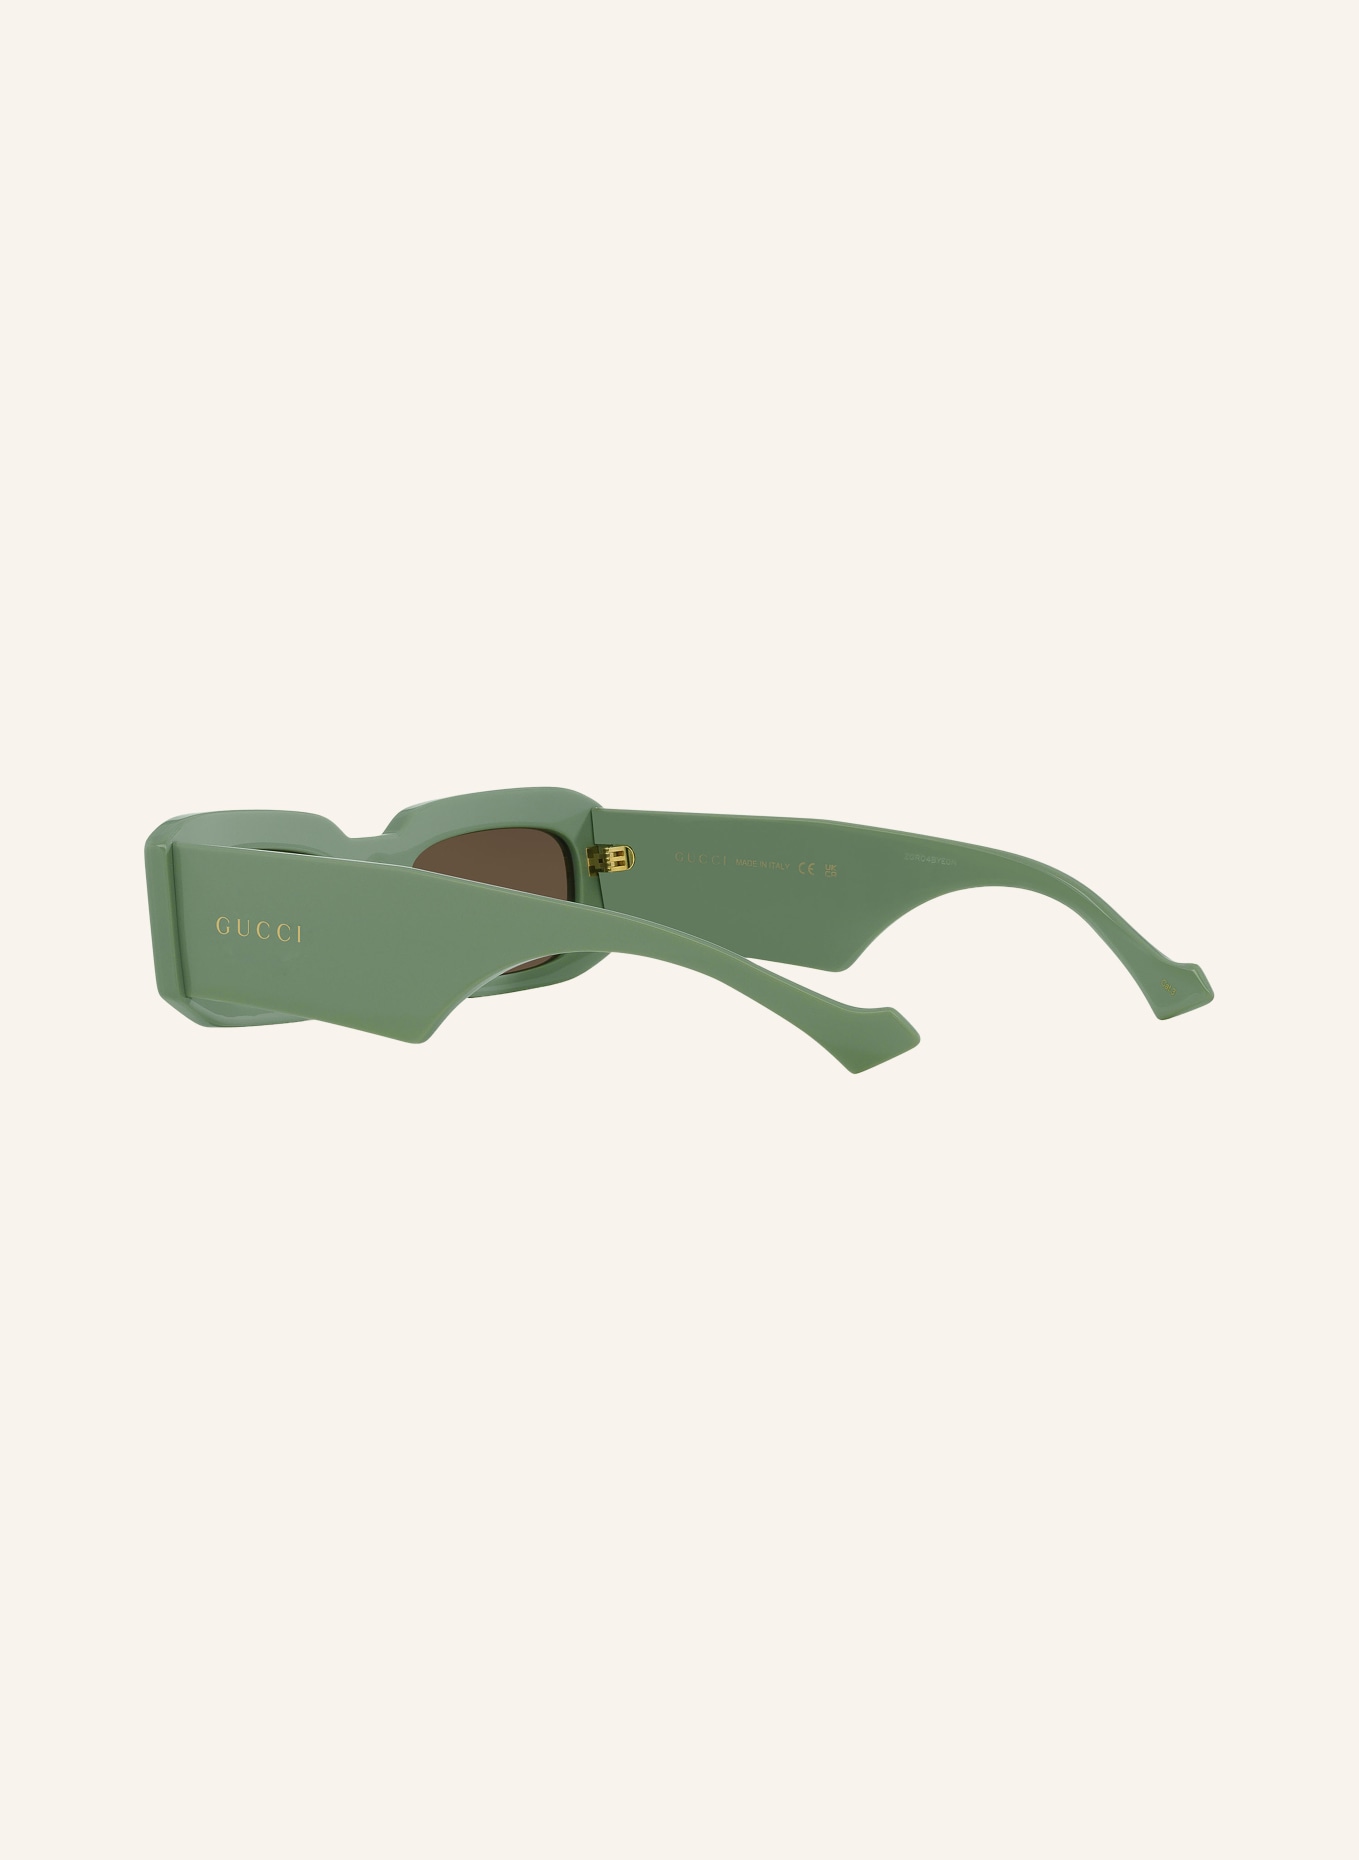 GUCCI Sunglasses GG1426S, Color: 2500D1 - LIGHT GREEN/ BROWN (Image 4)